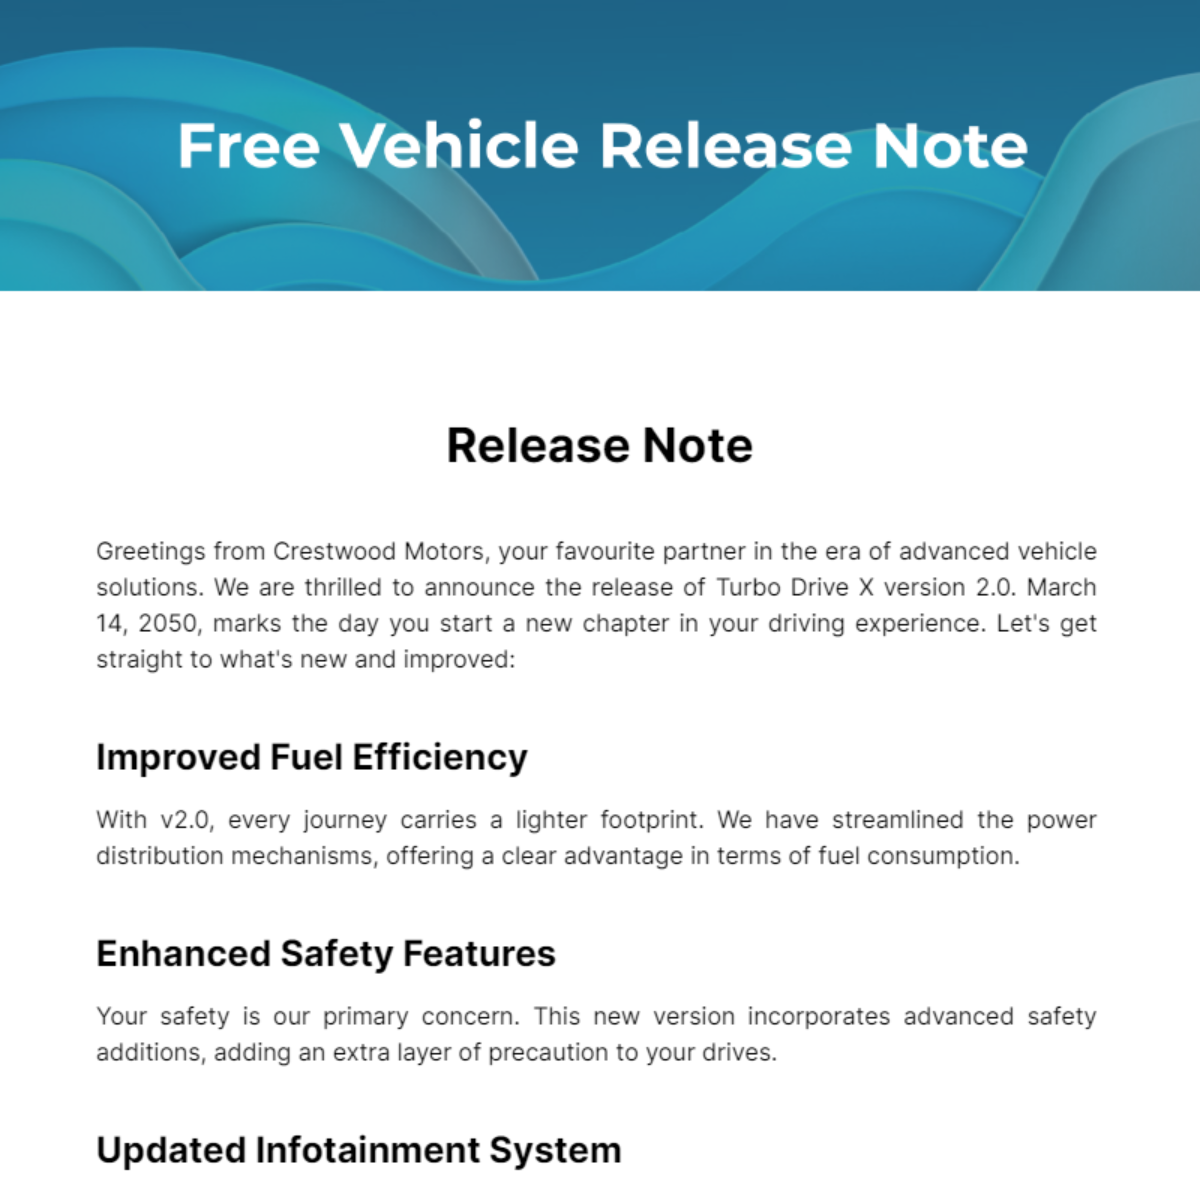 Free Vehicle Release Note Template